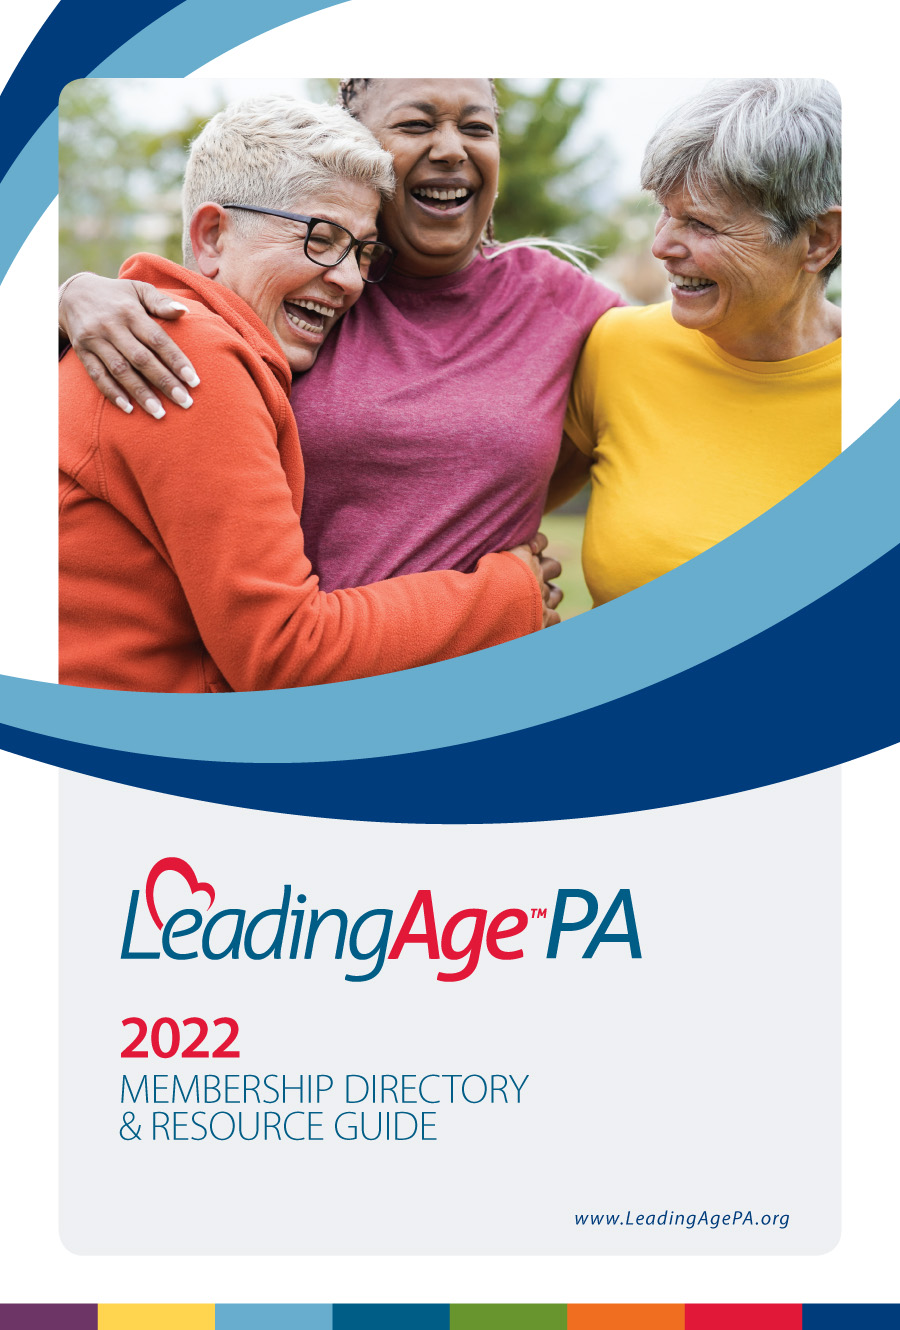 Thumbnail image of the front cover for the LeadingAge PA 2022 Membership Directory & Resource Guide